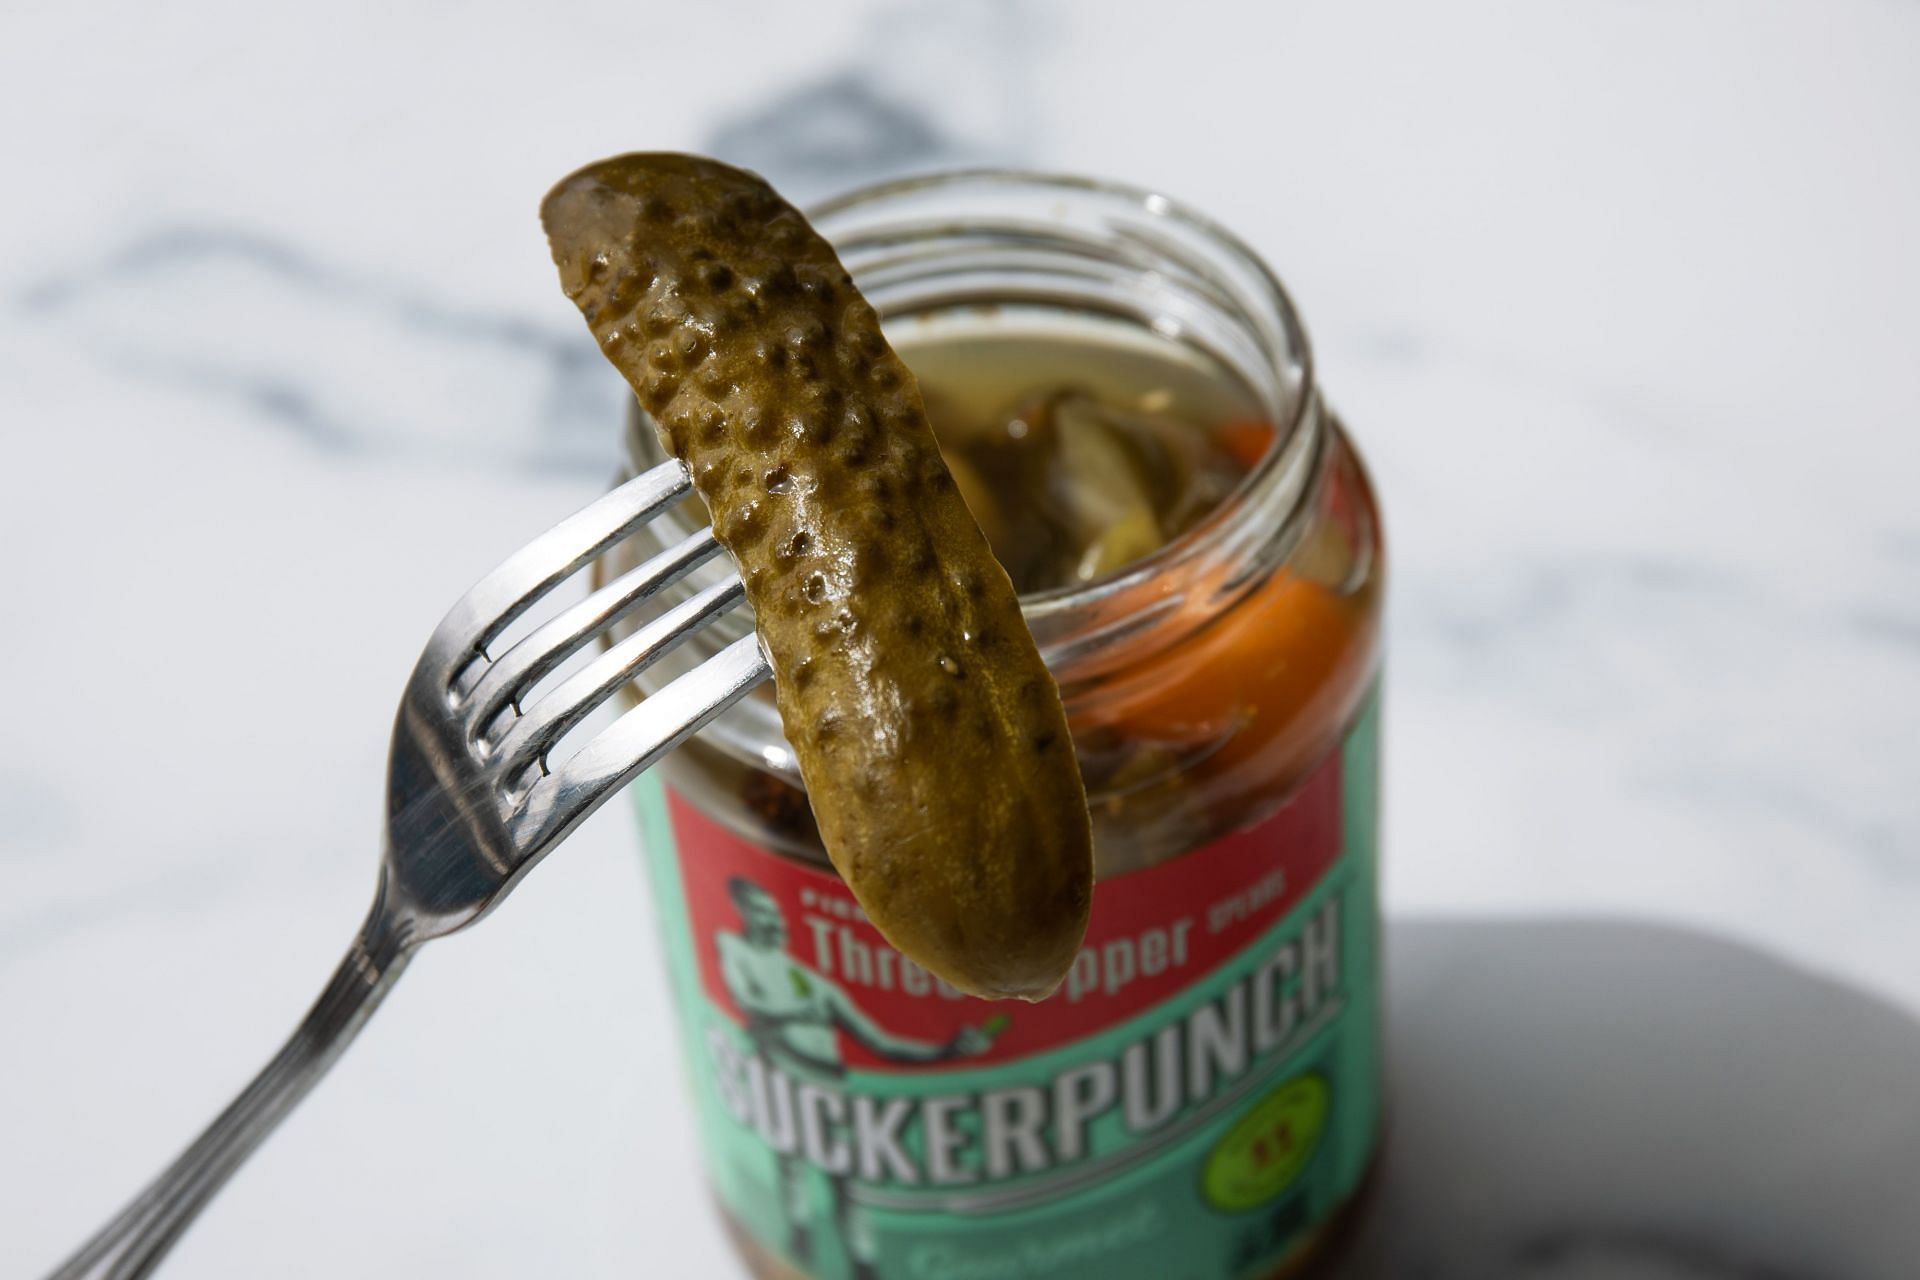 Pickles as well as pickle juice can cure hangover. (Image via Unsplash/ Suckerpunch Gourmet)